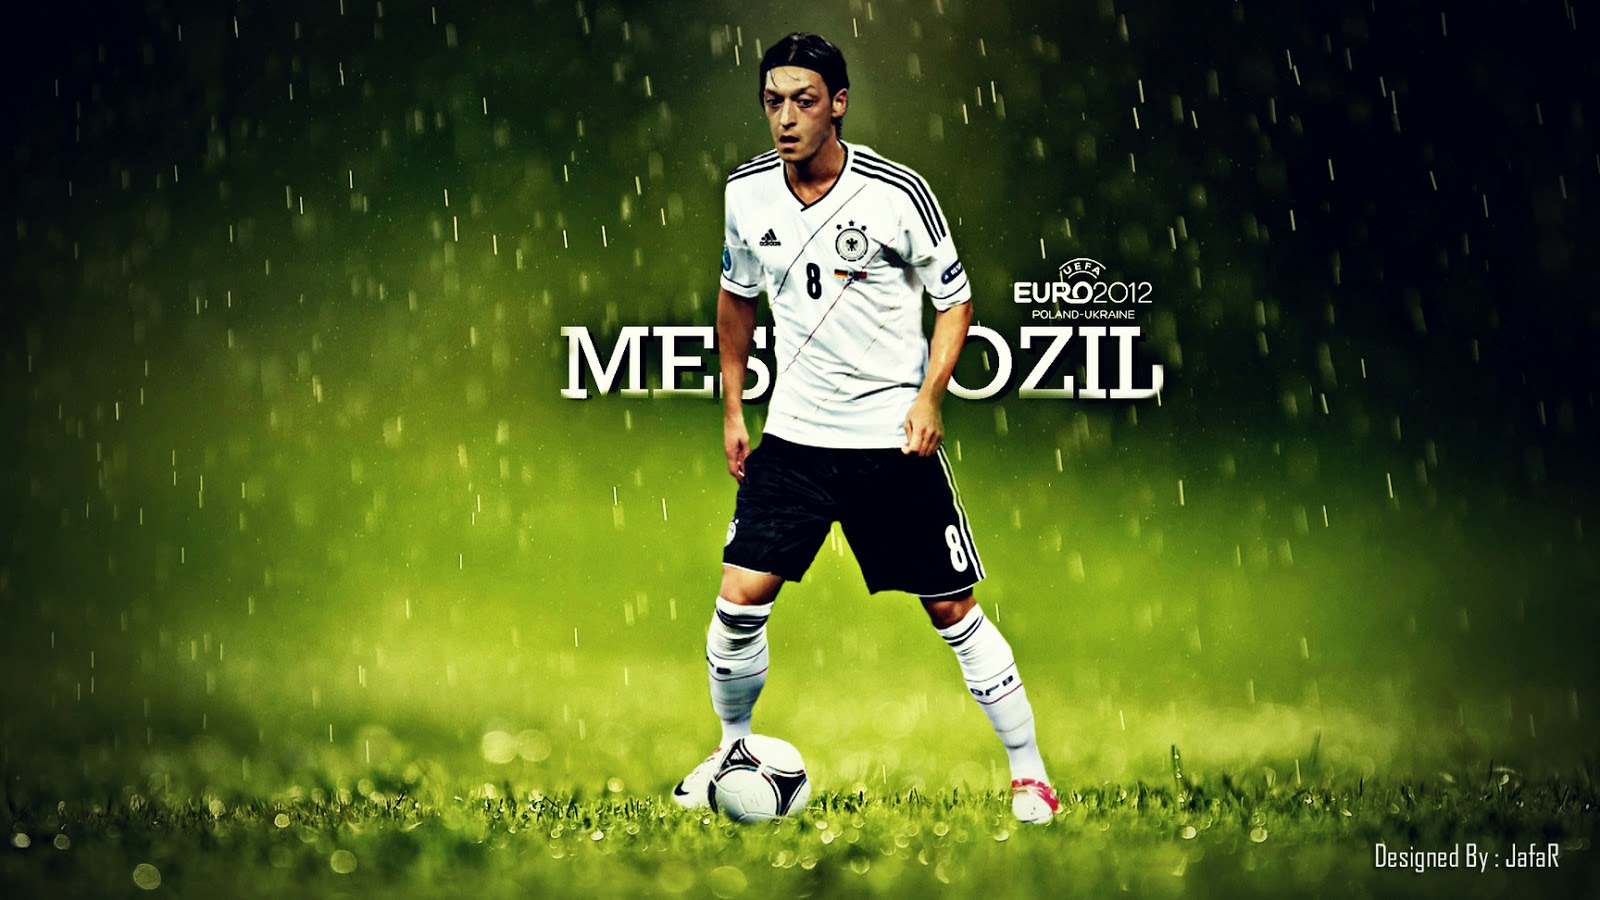 Mesut Ozil Best Assist 2013 Wallpapers HD Photo Picture Image